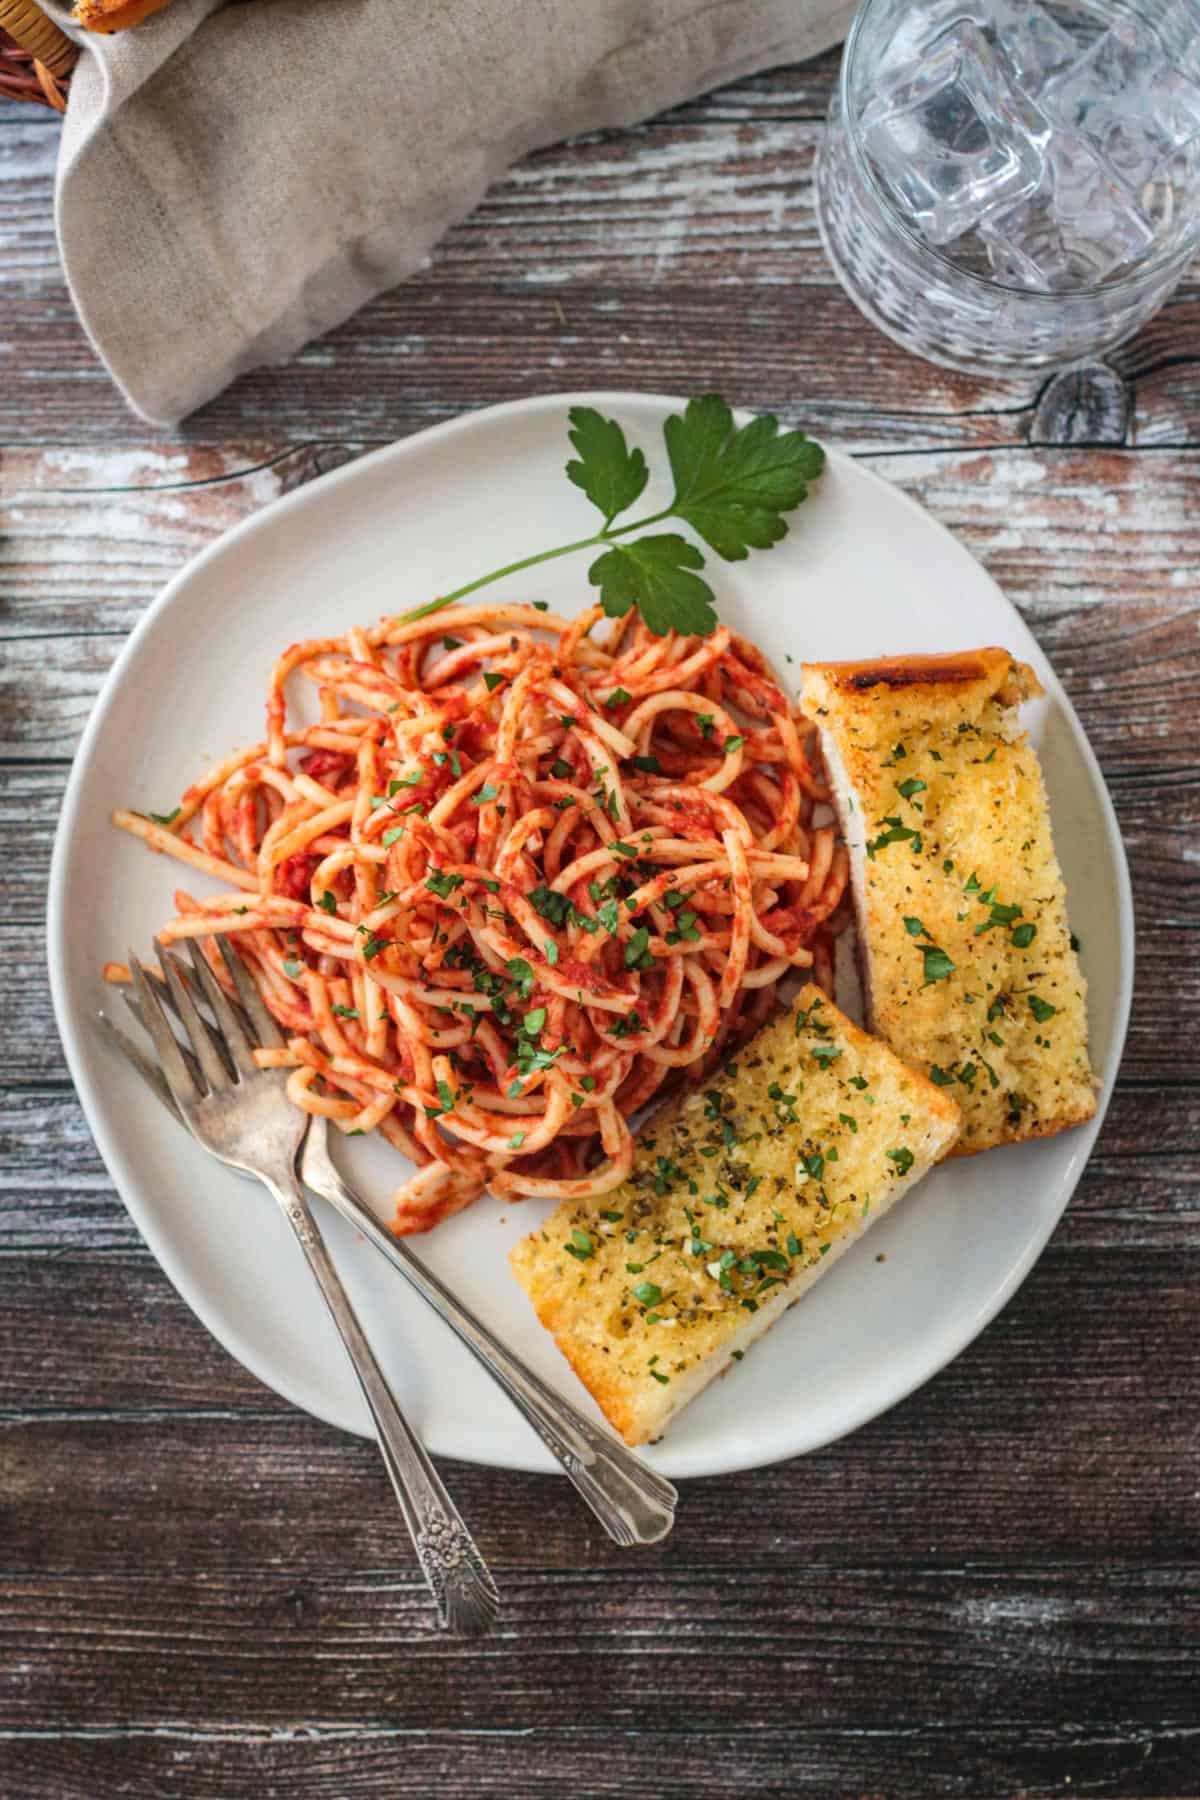 Plate of spaghetti with two slices of garlic bread.